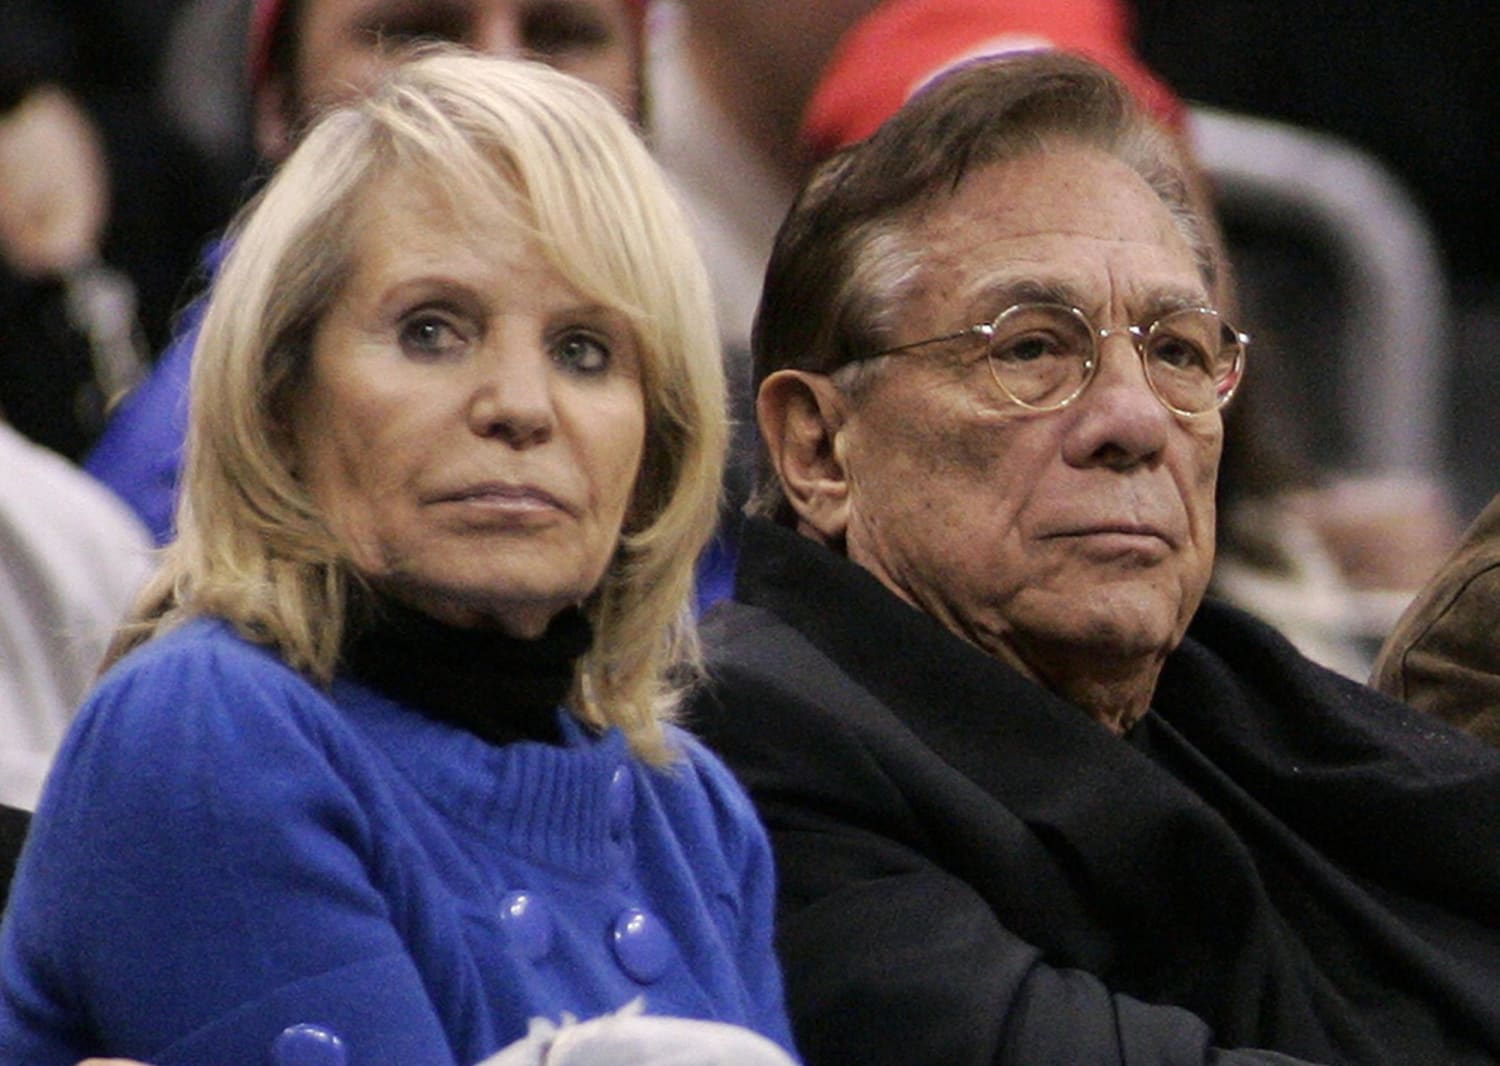 Judge Rules Against Donald Sterling, Clearing Way for Clippers Sale - NBC News